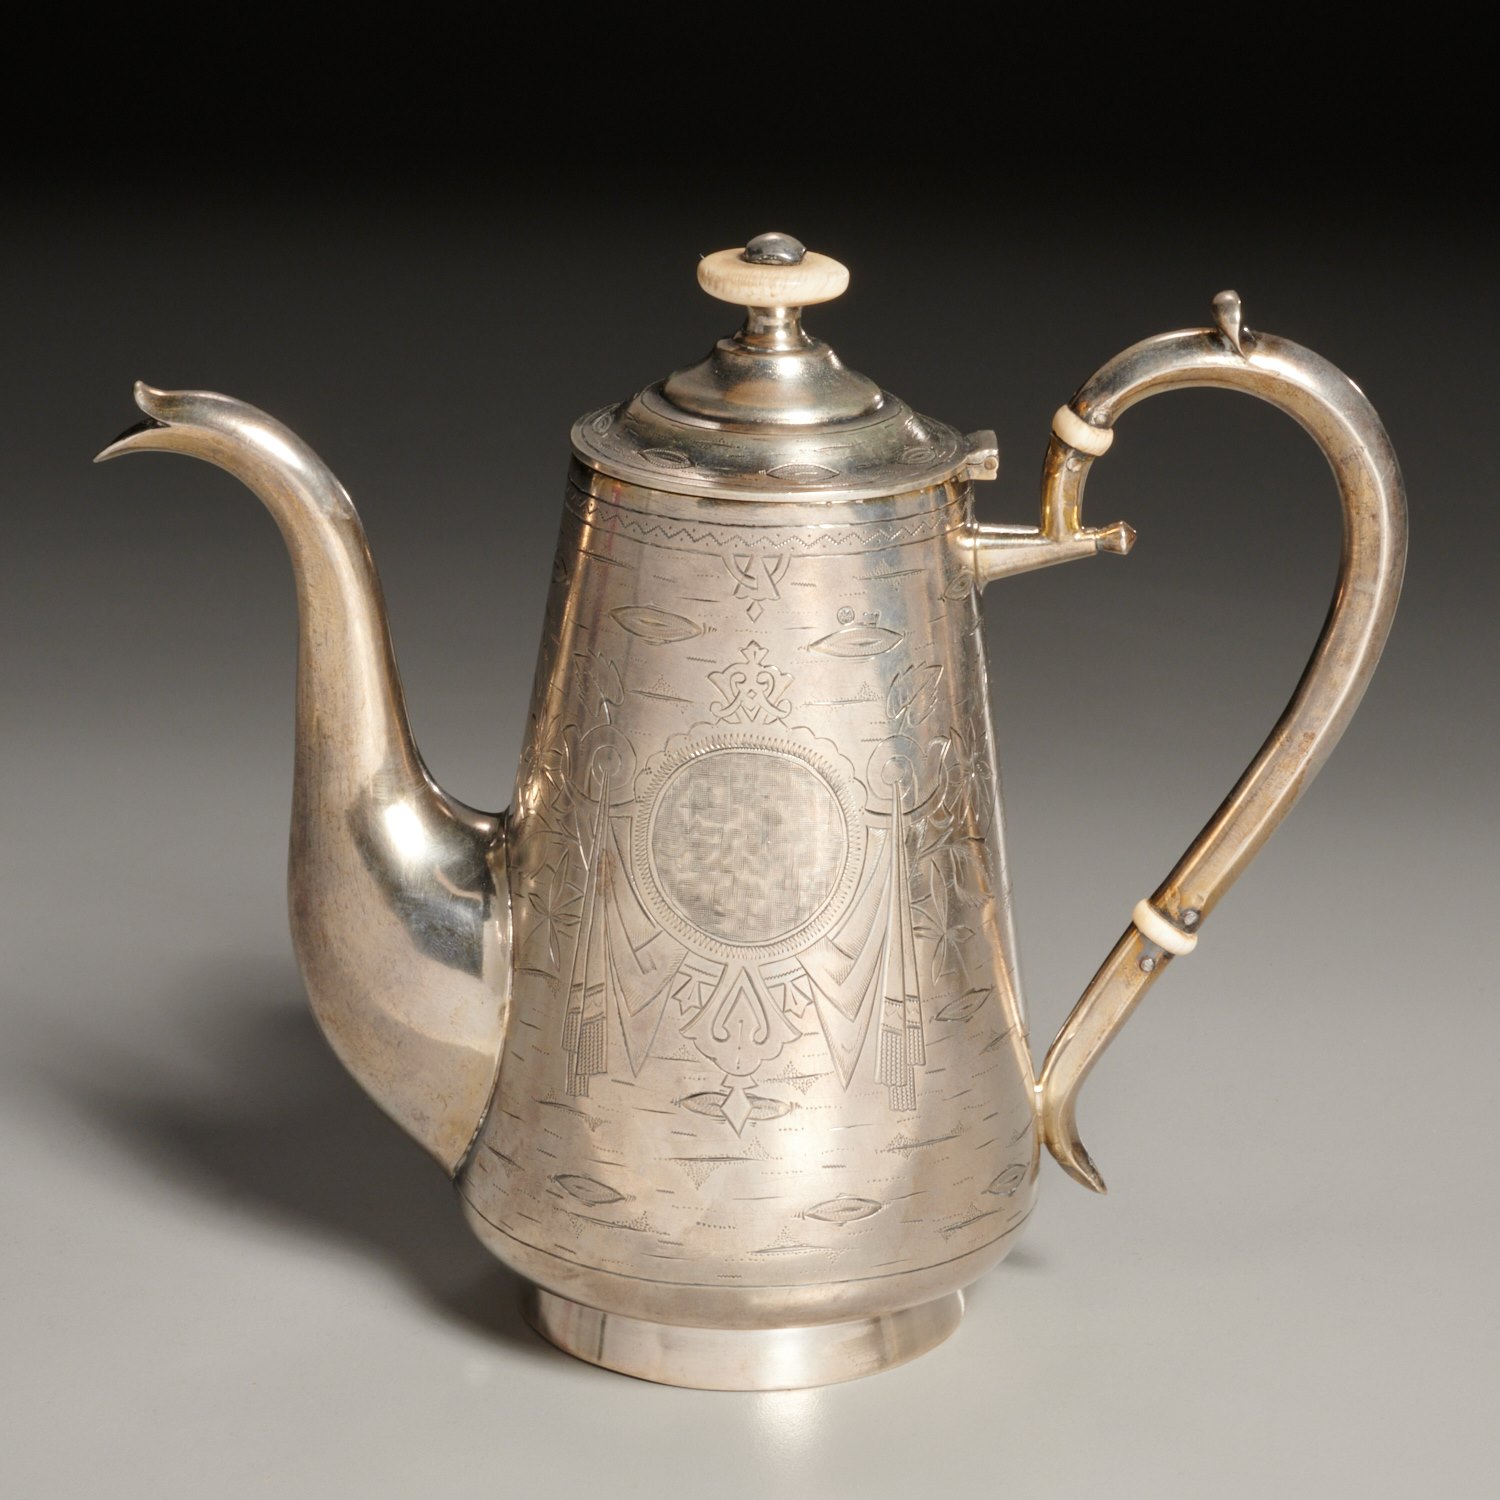 RUSSIAN ENGRAVED SILVER COFFEEPOT 2a5daf